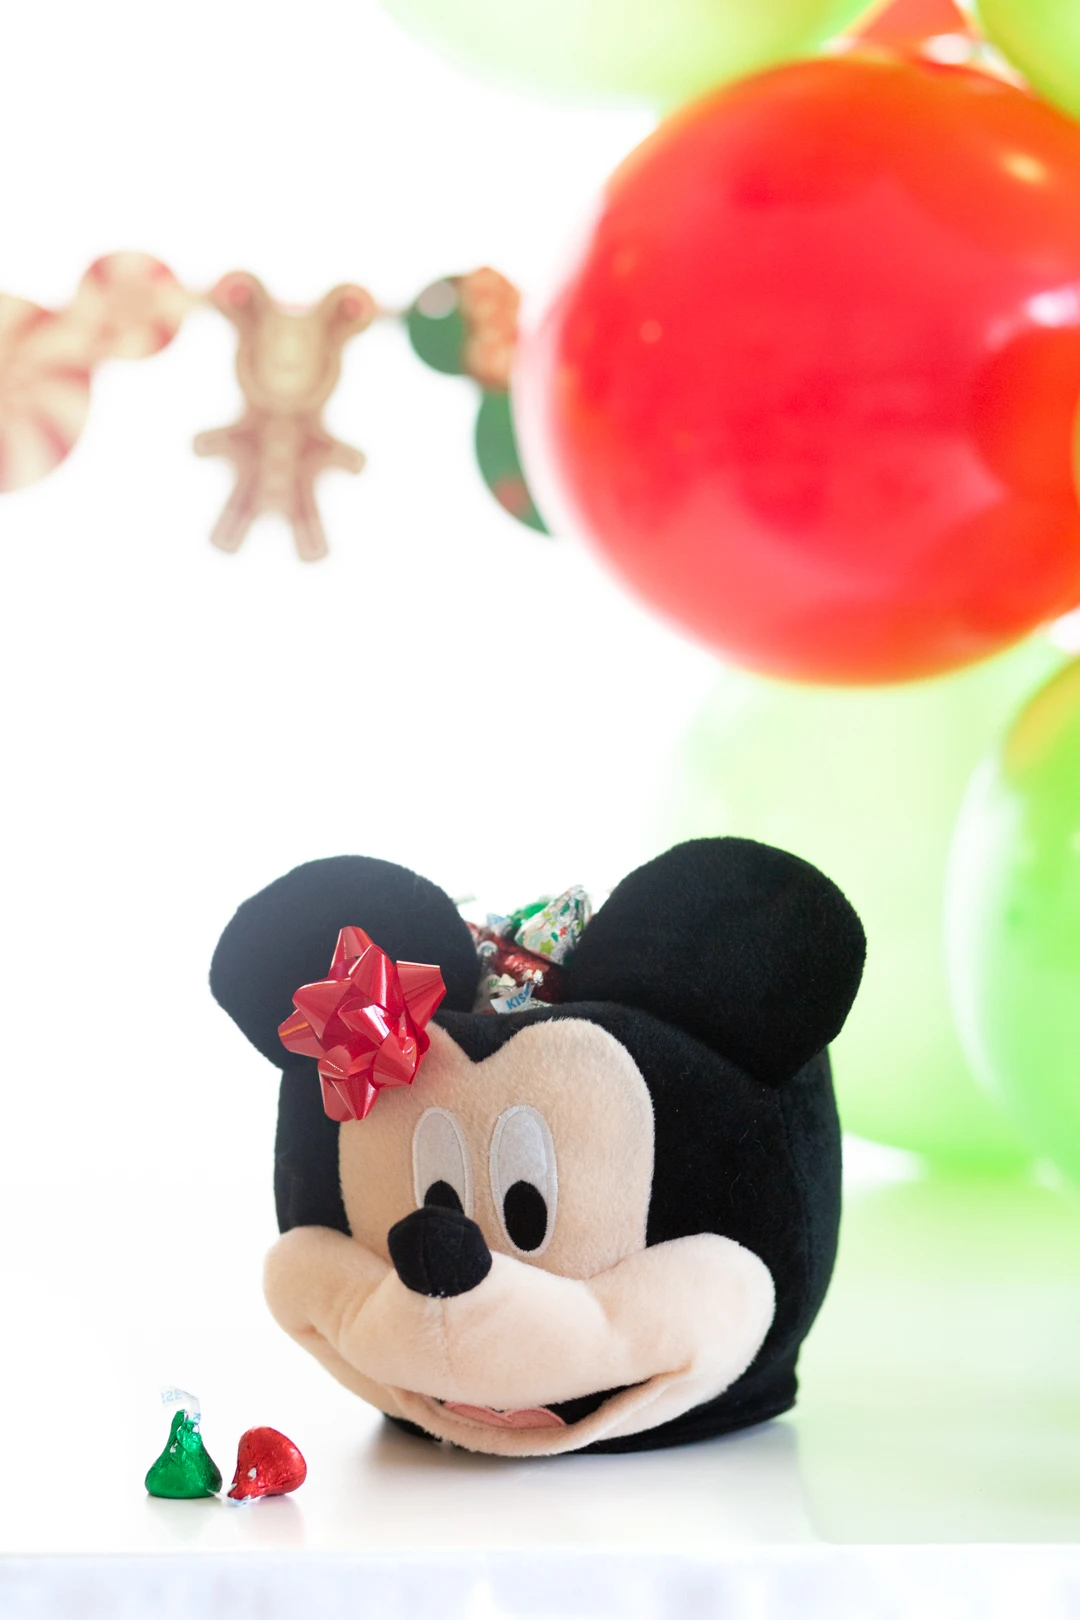 mickey mouse halloween treat bucket shaped like mickey mouse head being used to celebrate christmas. small gif bow on top to decorate and filled with christmas themed hershey's kisses